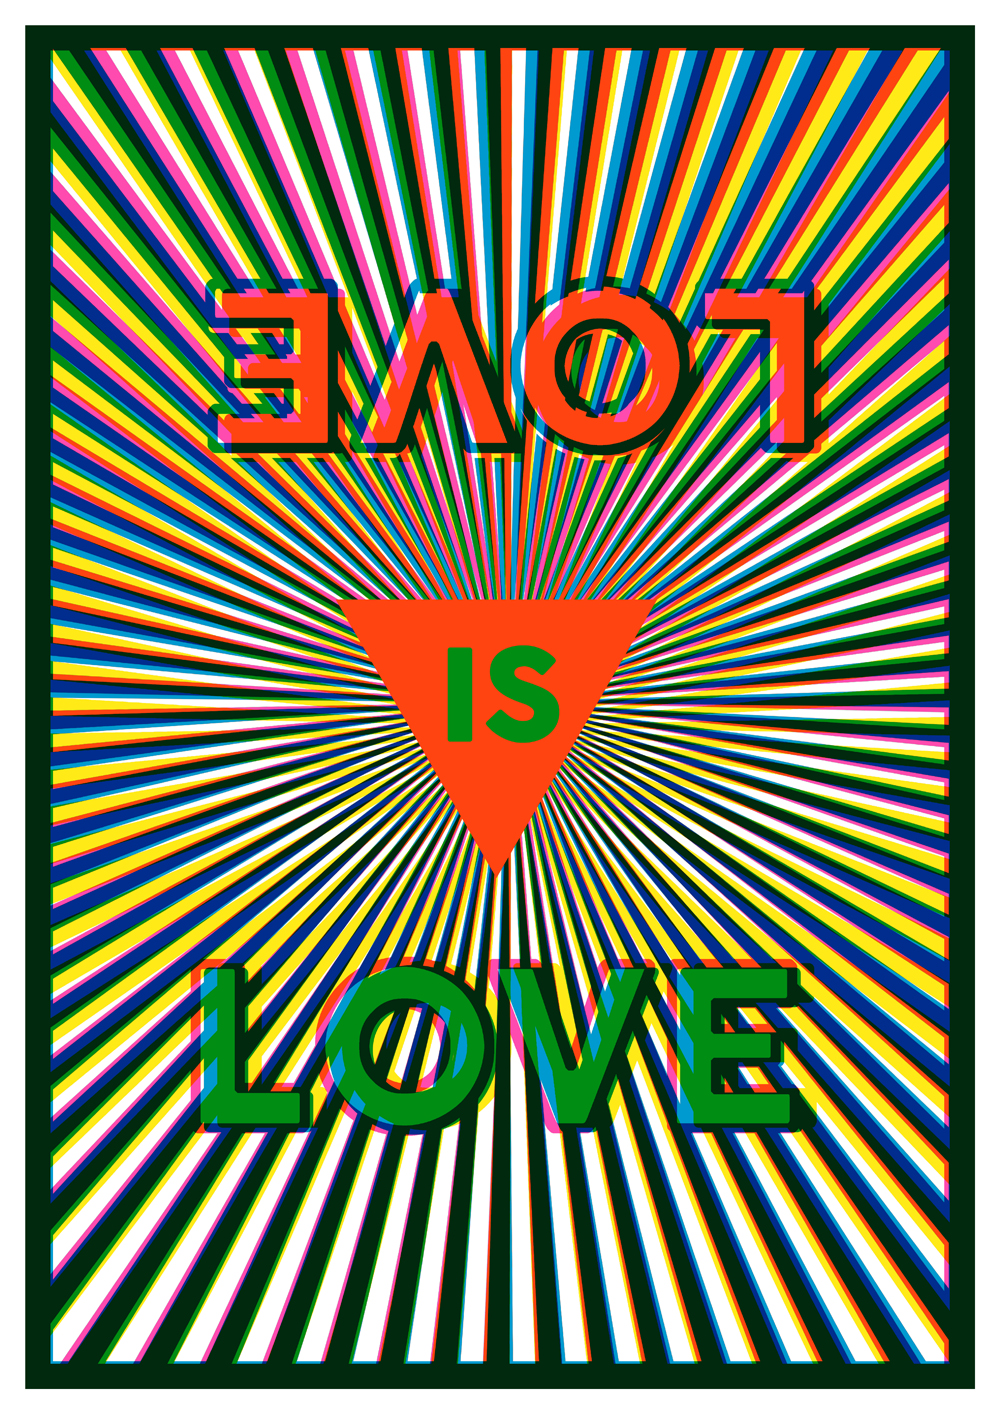 'Love is Love' Margate pride poster by Jacob Love